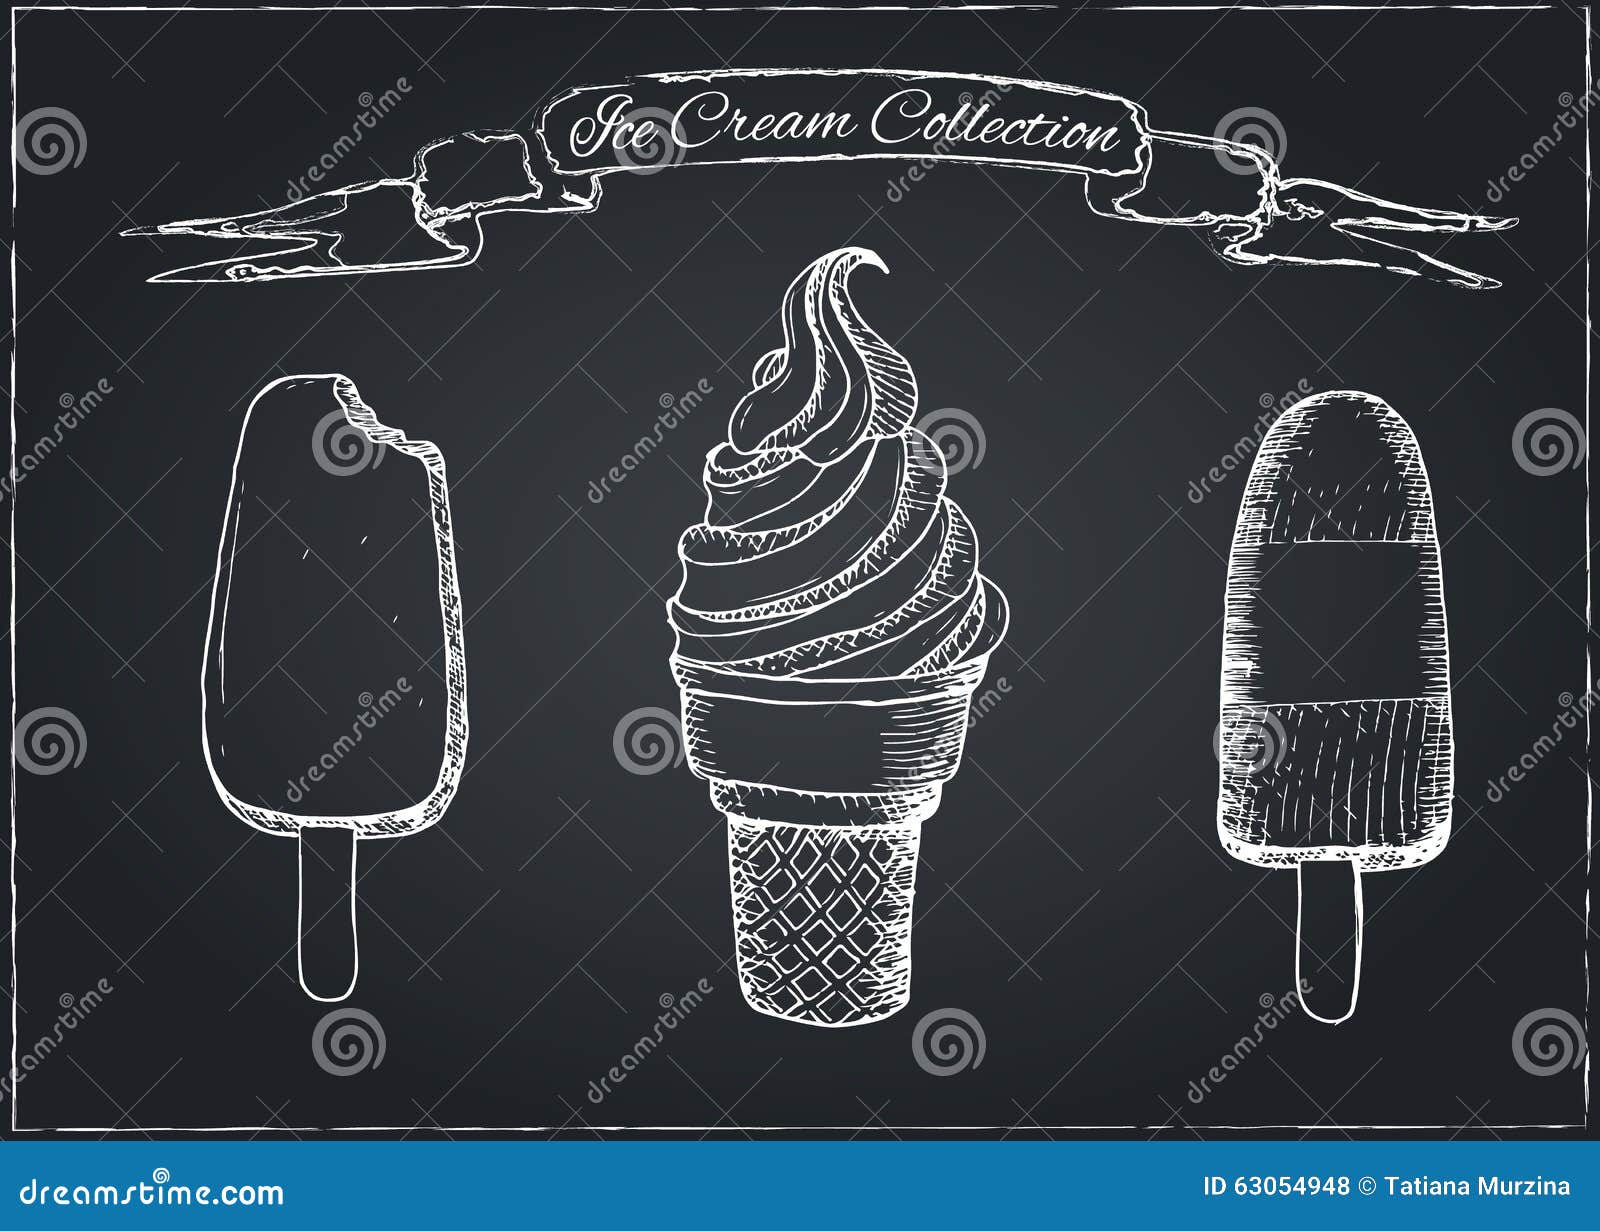 hand drawn ice cream set chalkboard can be used restaurant menu cooking books labels 63054948